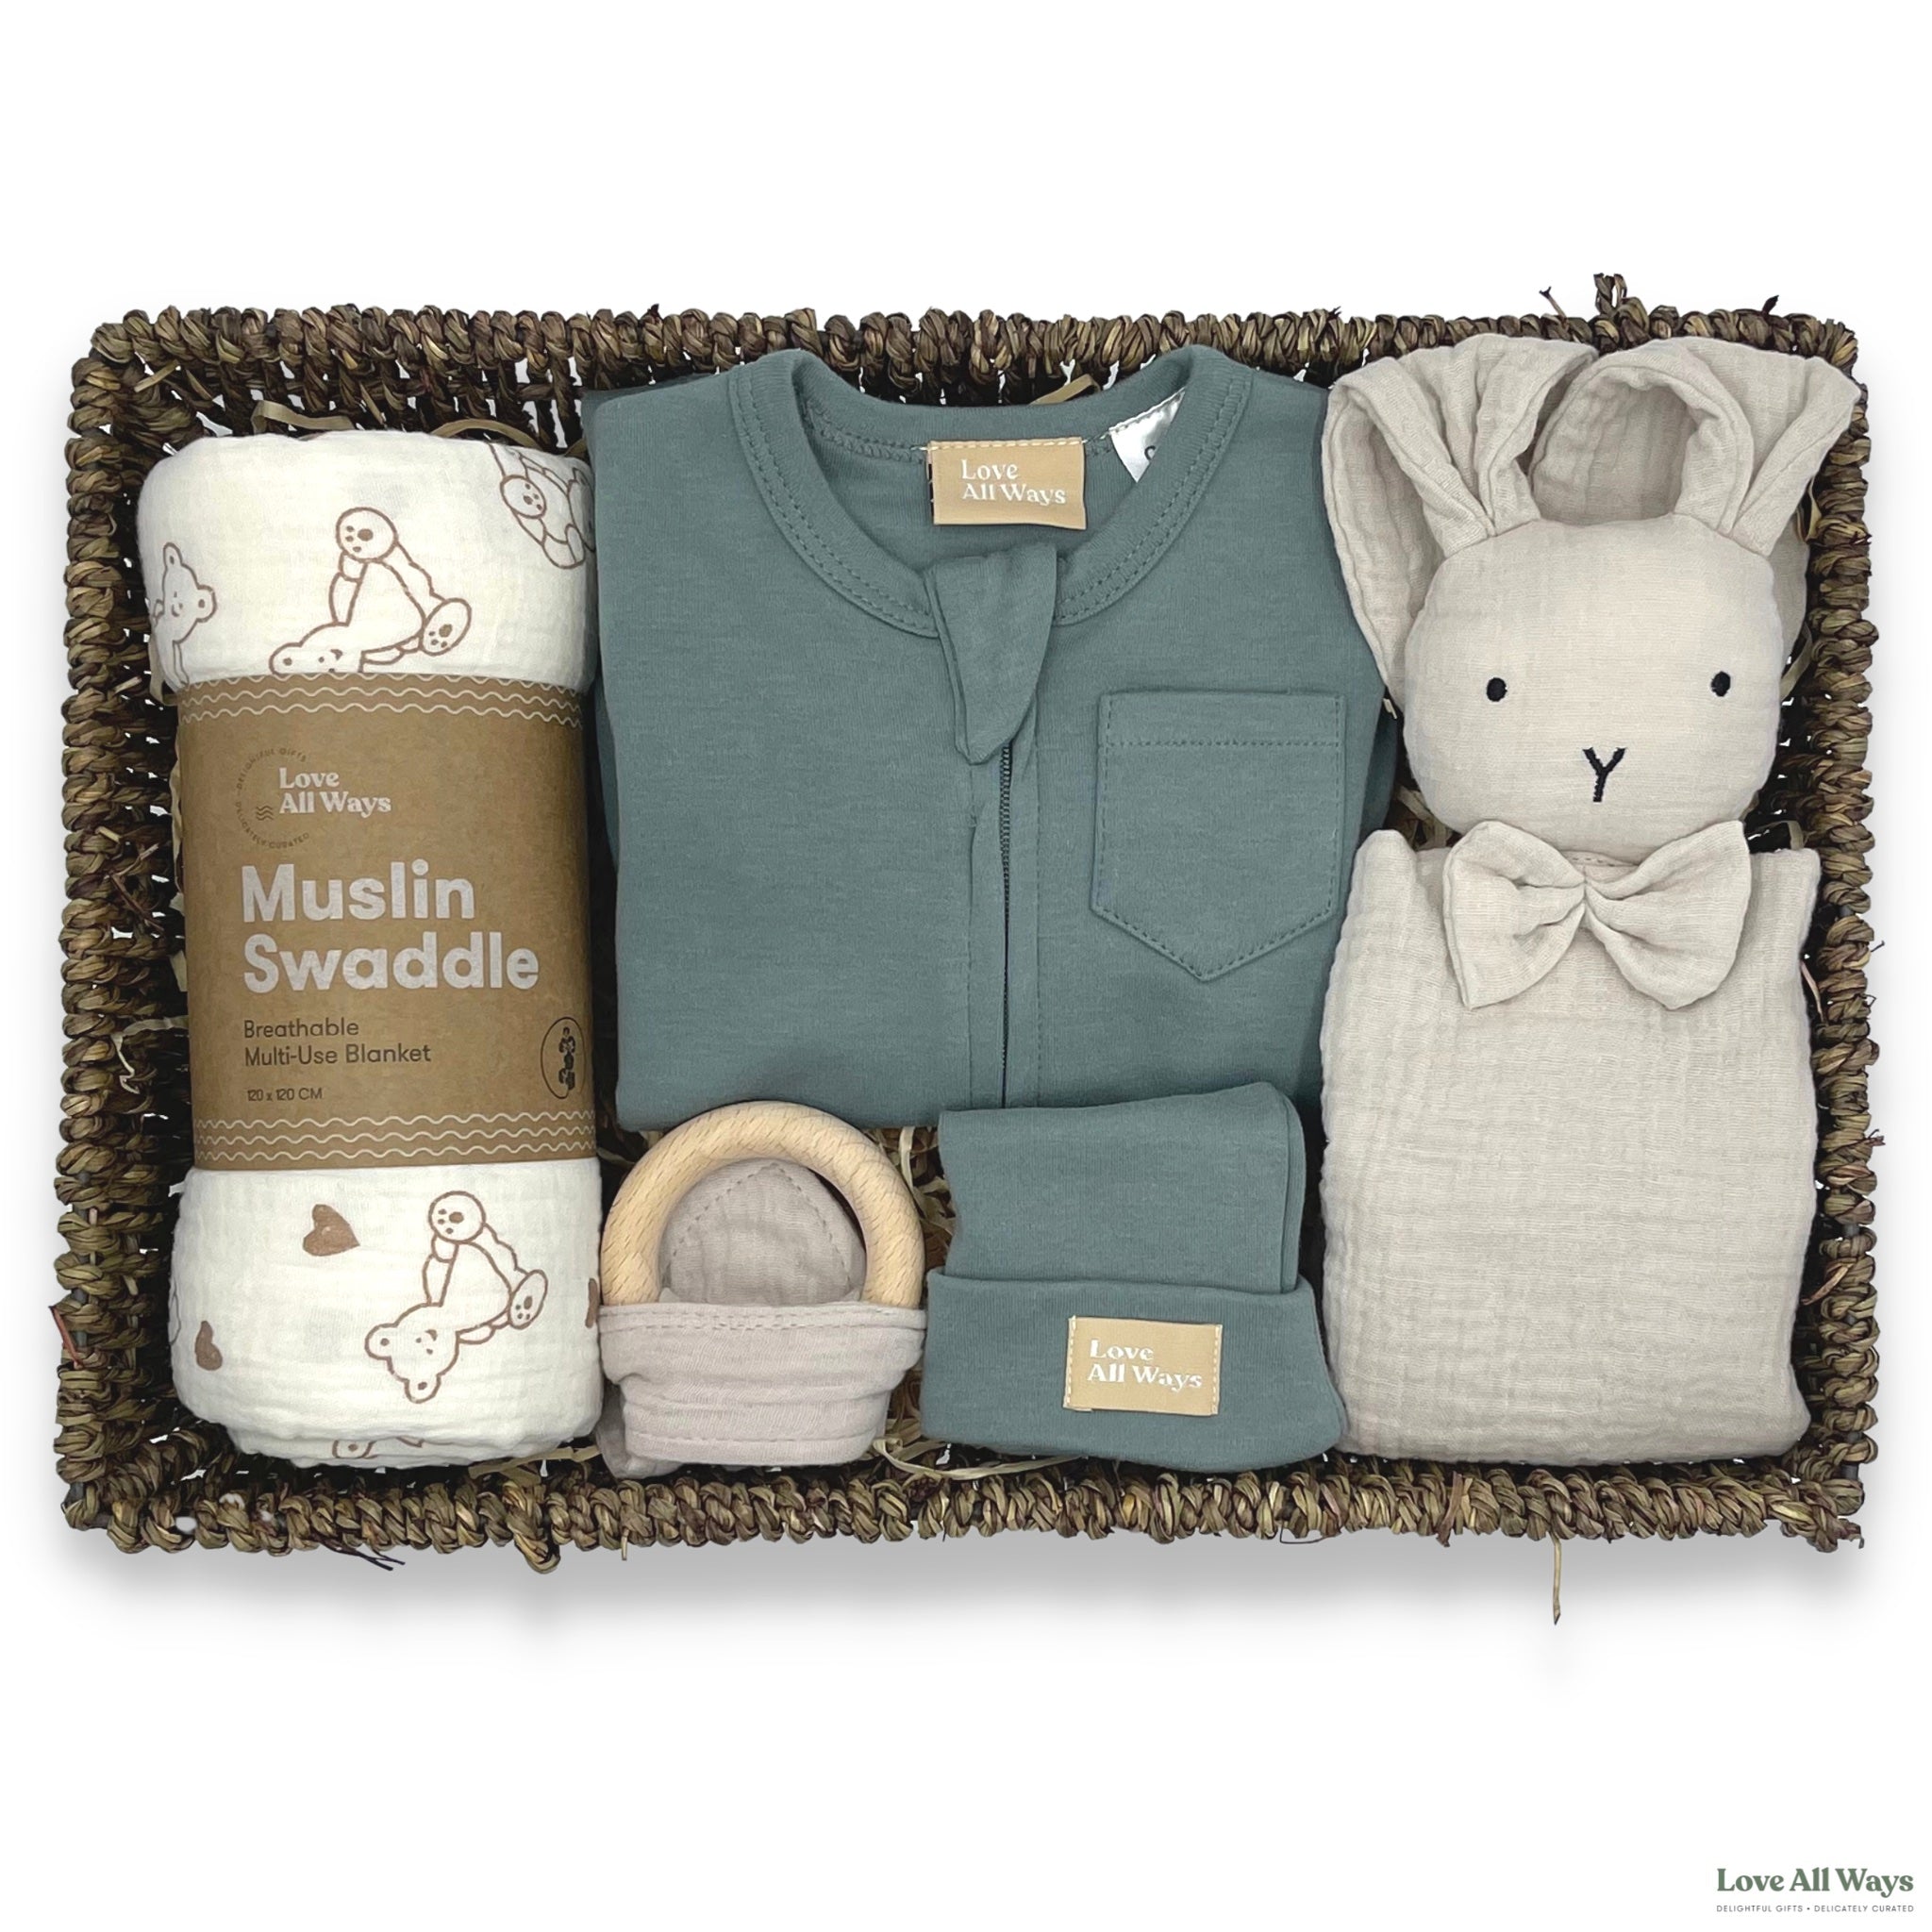 This Organic Cotton Comfort Hamper delivers a message of celebration, affection and sense of ease. The premium organic products are natural, breathable and supremely comforting. The use of Greens with beige is a neutral classic that looks natural, this is safely delivered in our natural seagrass hamper